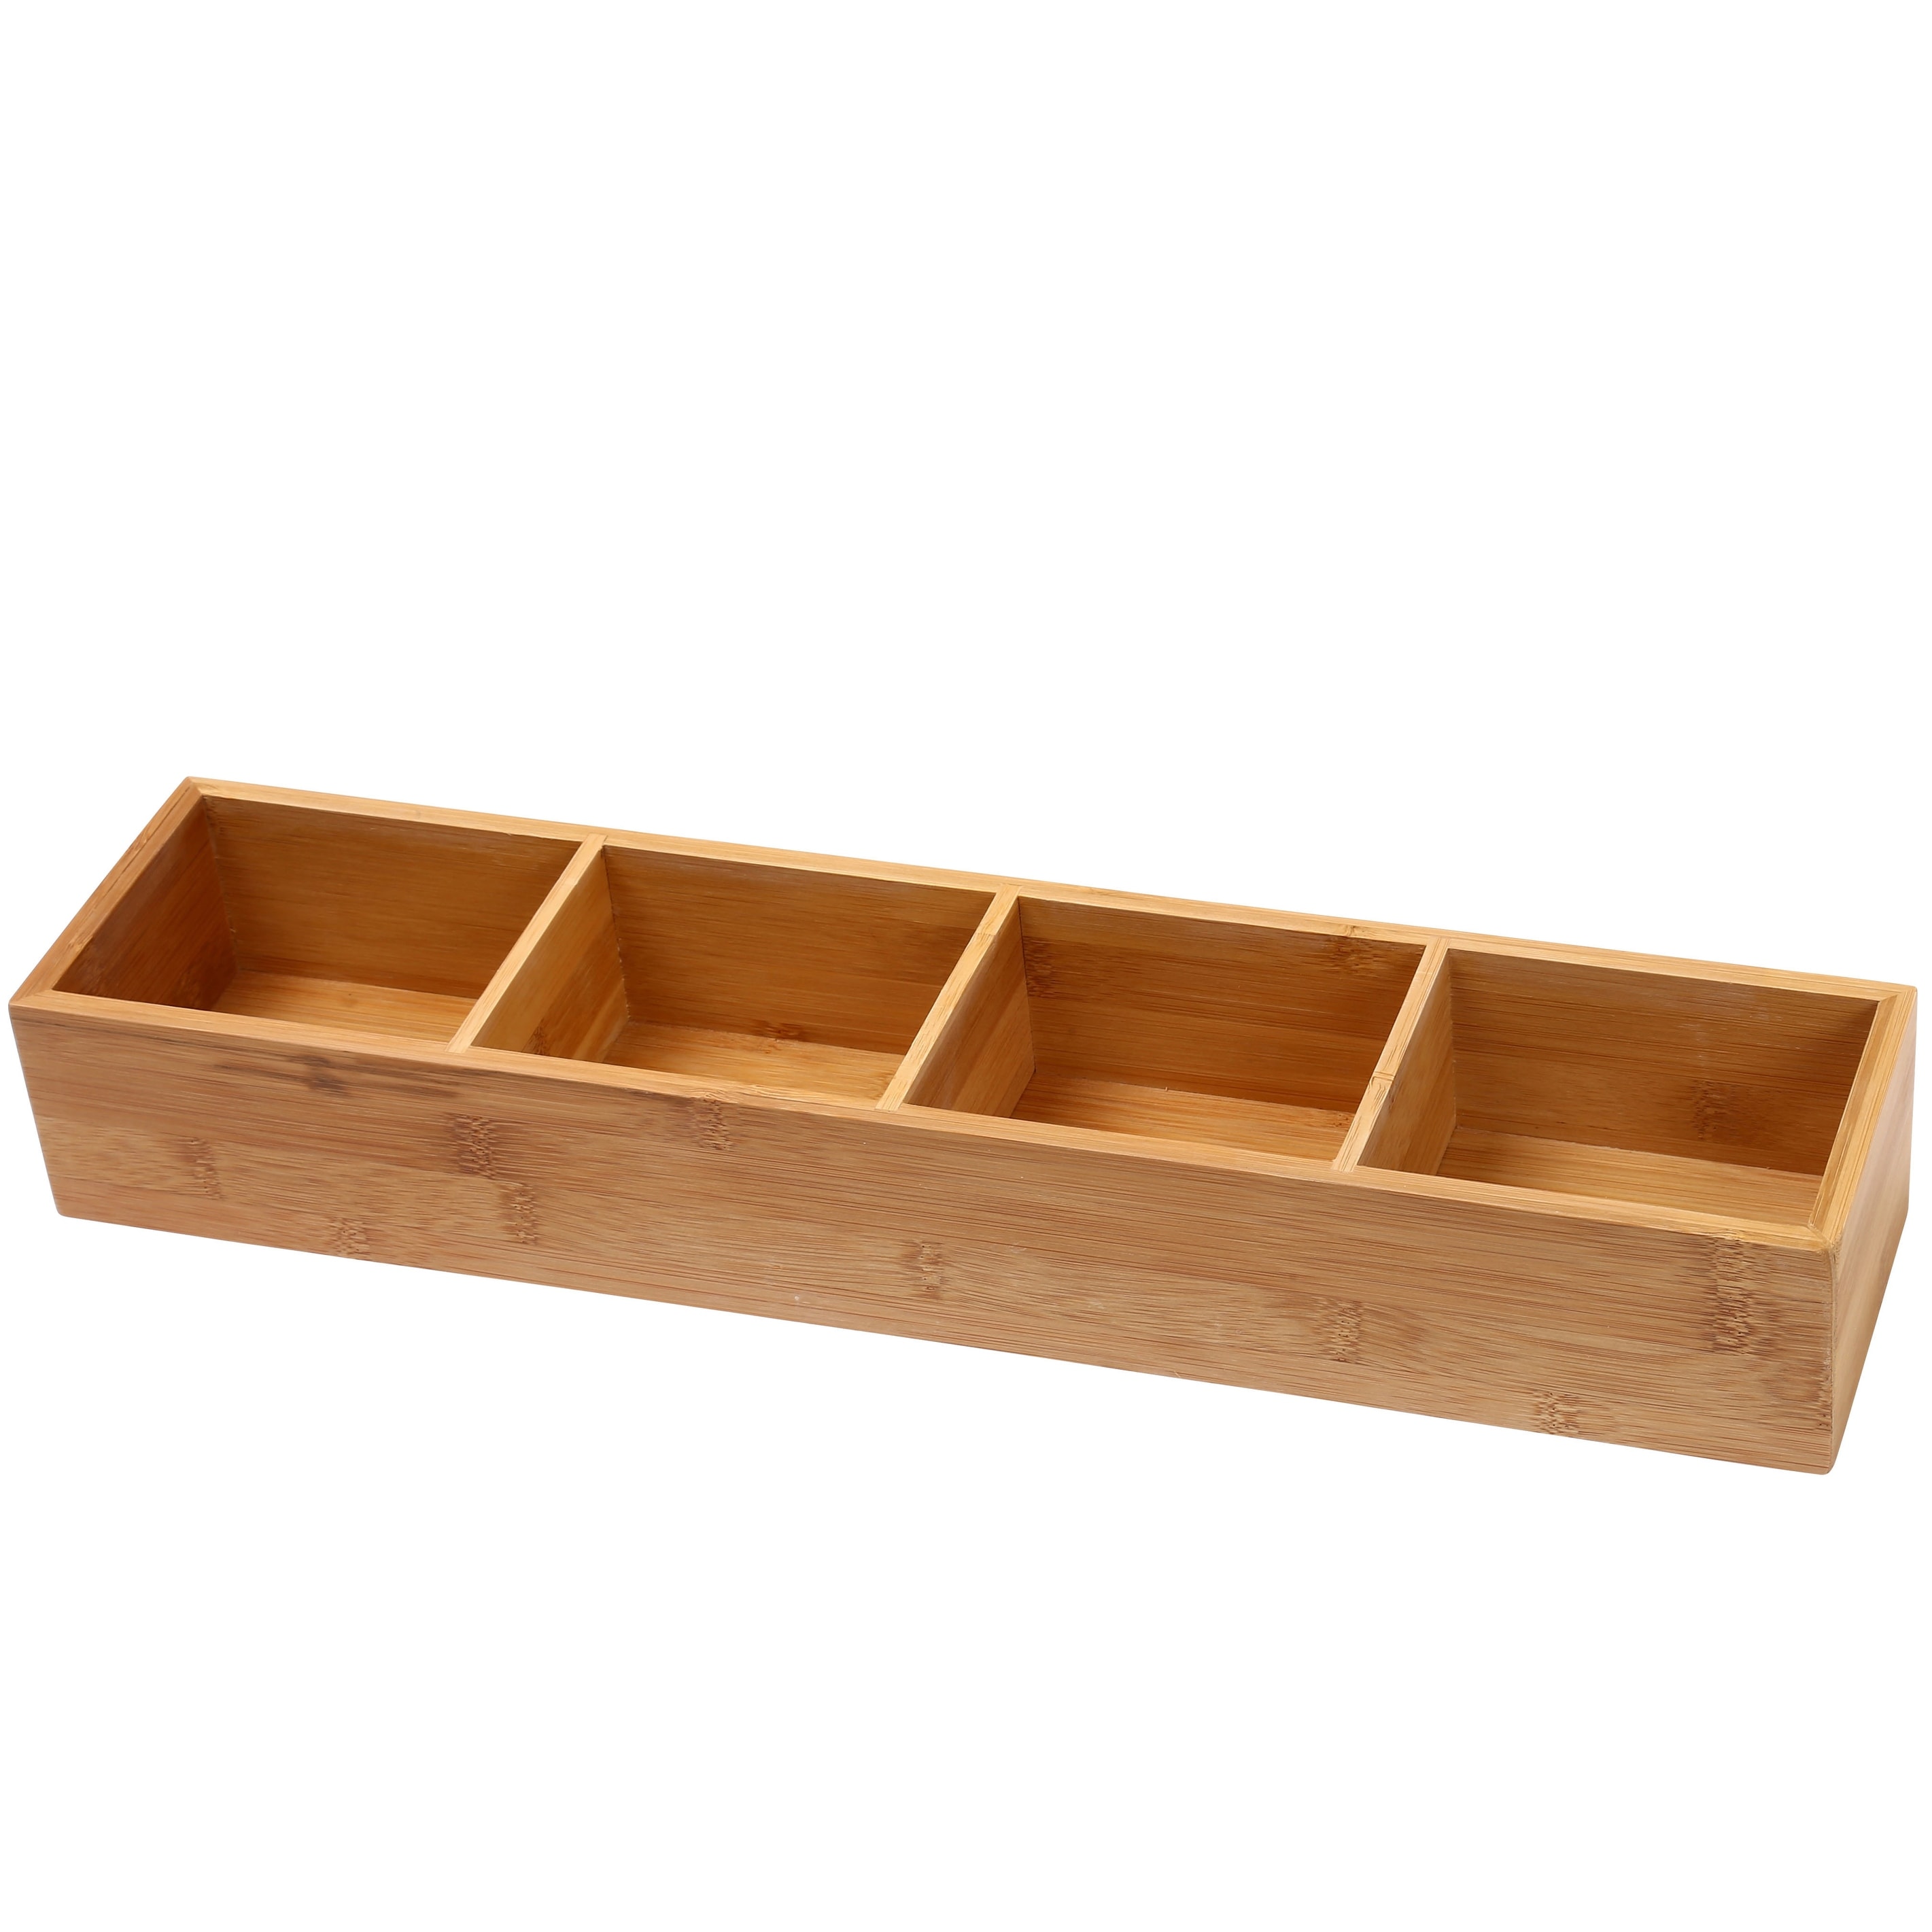 YBM HOME Bamboo 4 Compartment Organizer Tray for Drawers - 4 Compartment -  On Sale - Bed Bath & Beyond - 30525933